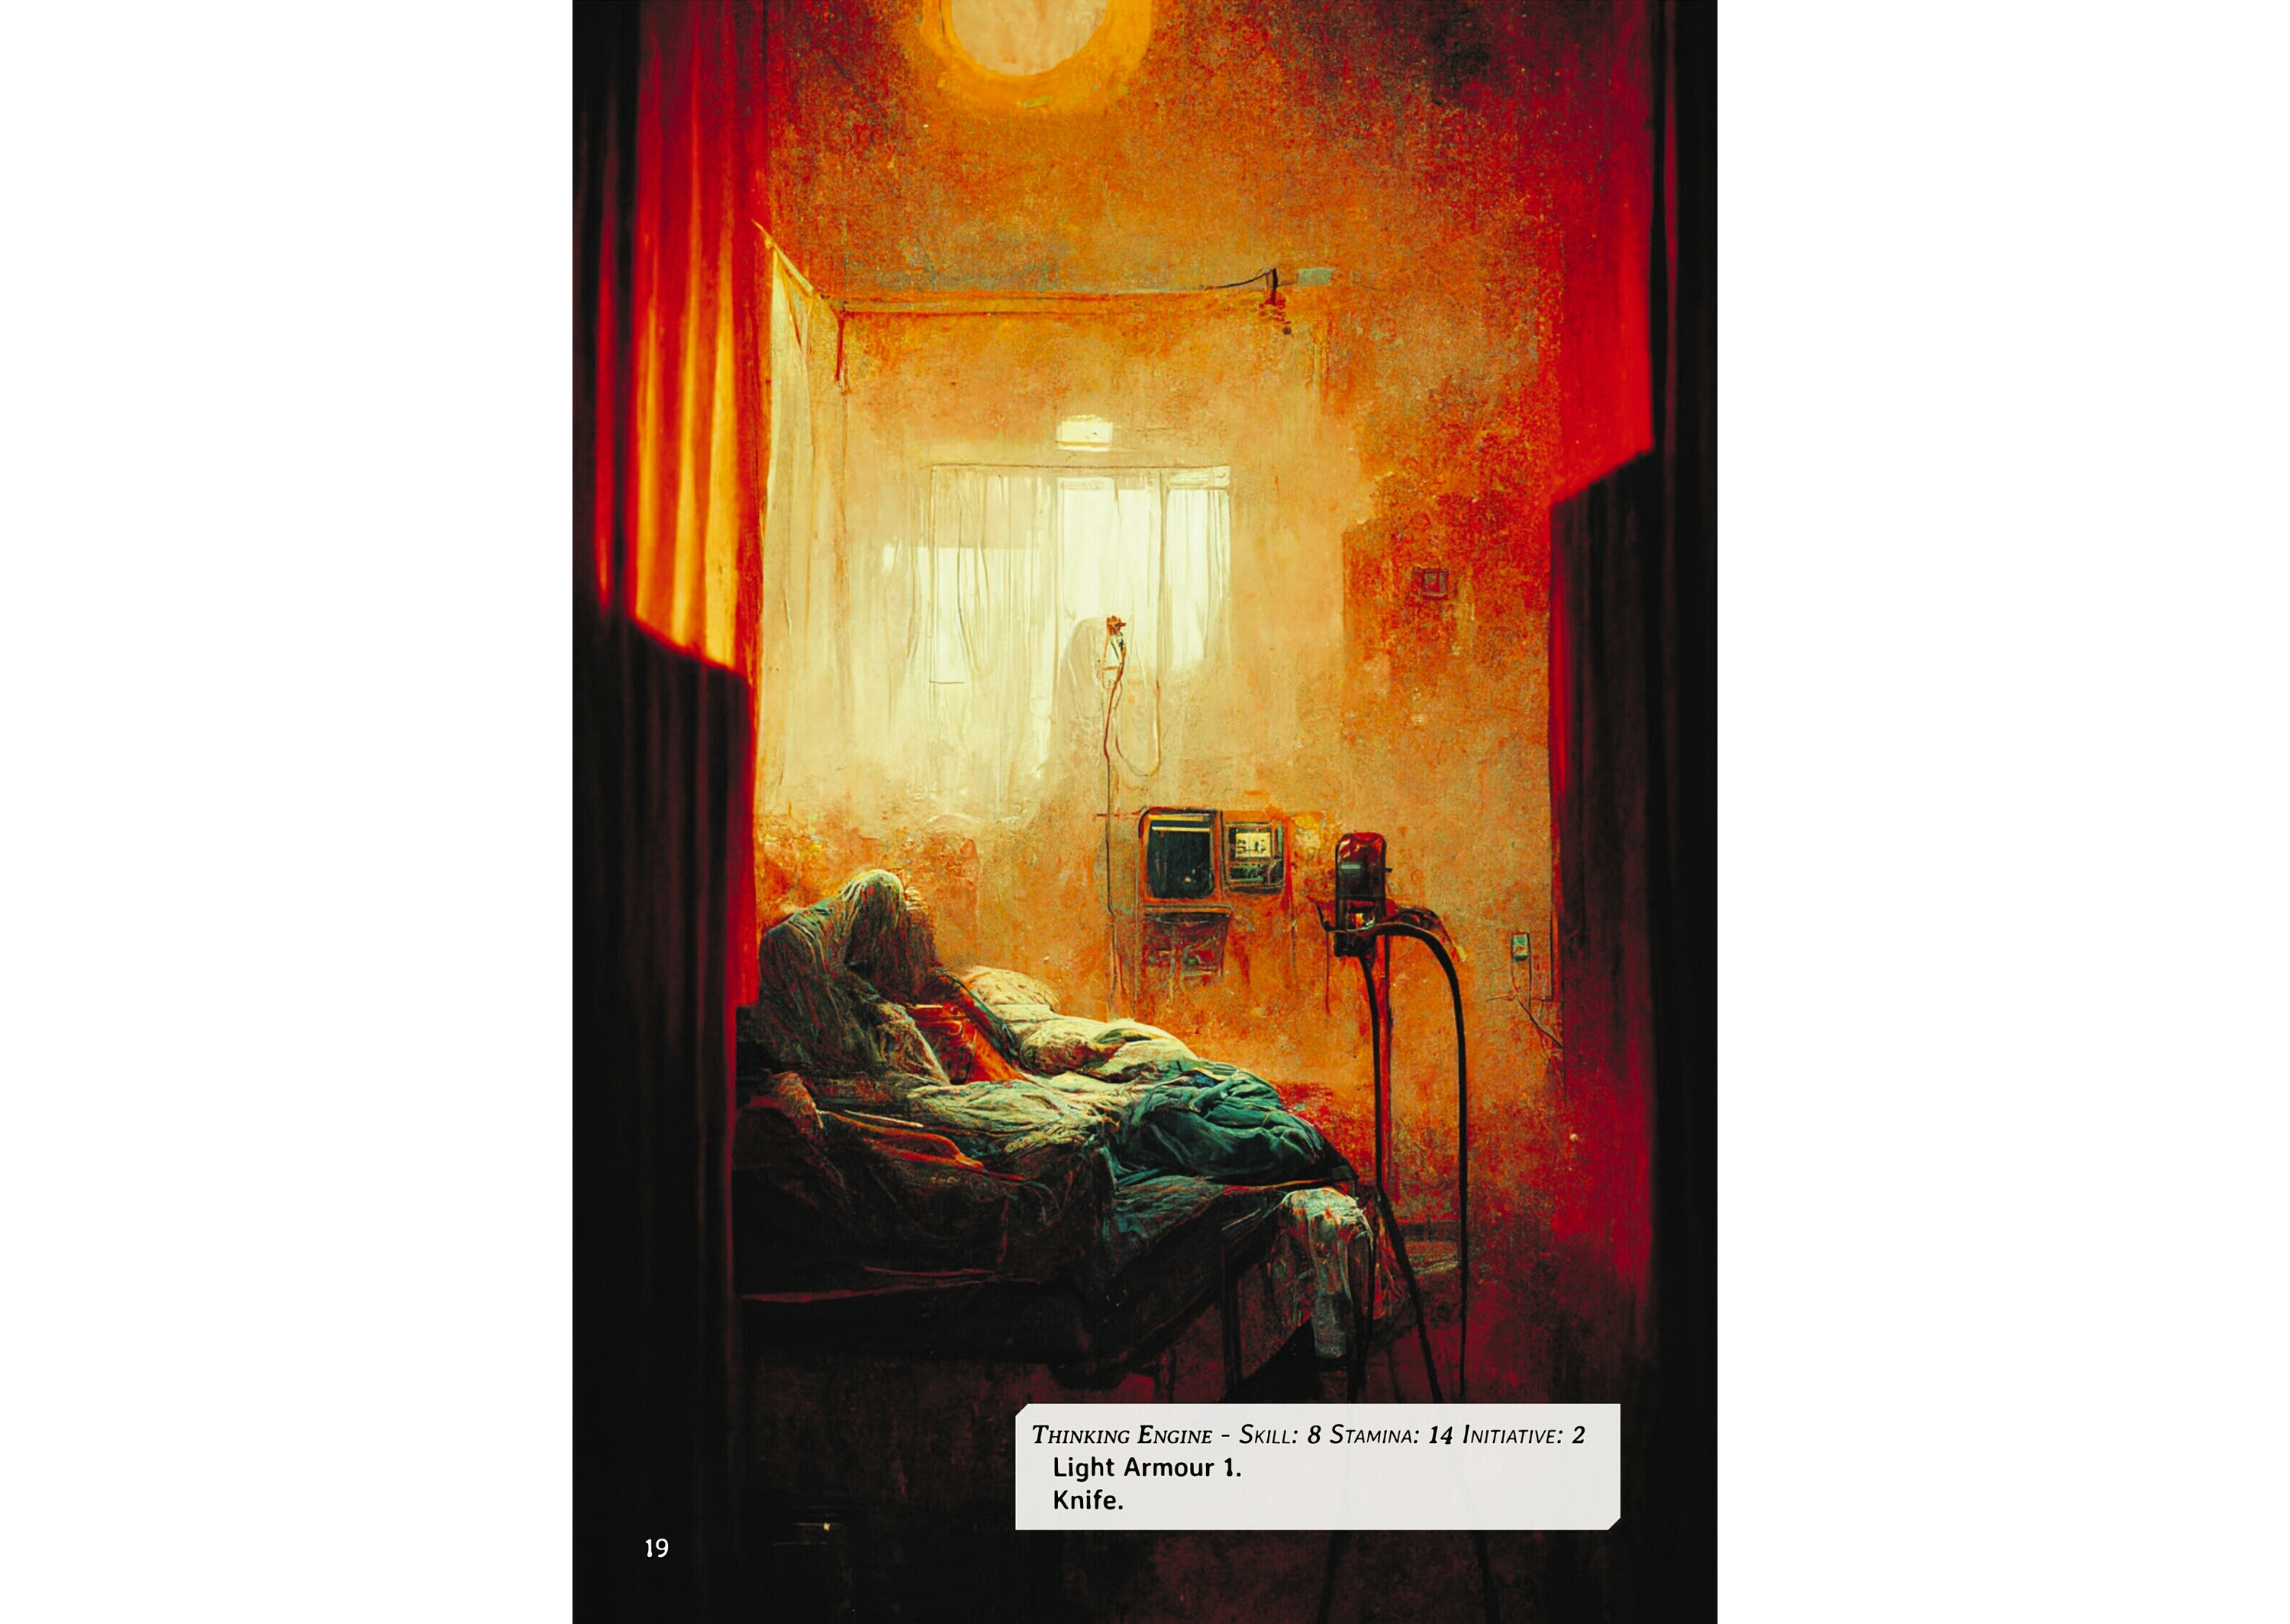 A hazy full page illustration of, possibly, a hospital room, with a figure in bed in the lower portion and some machinery on the walls. A white cut-out with stats for a “thinking engine” is in the lower right-hand corner..